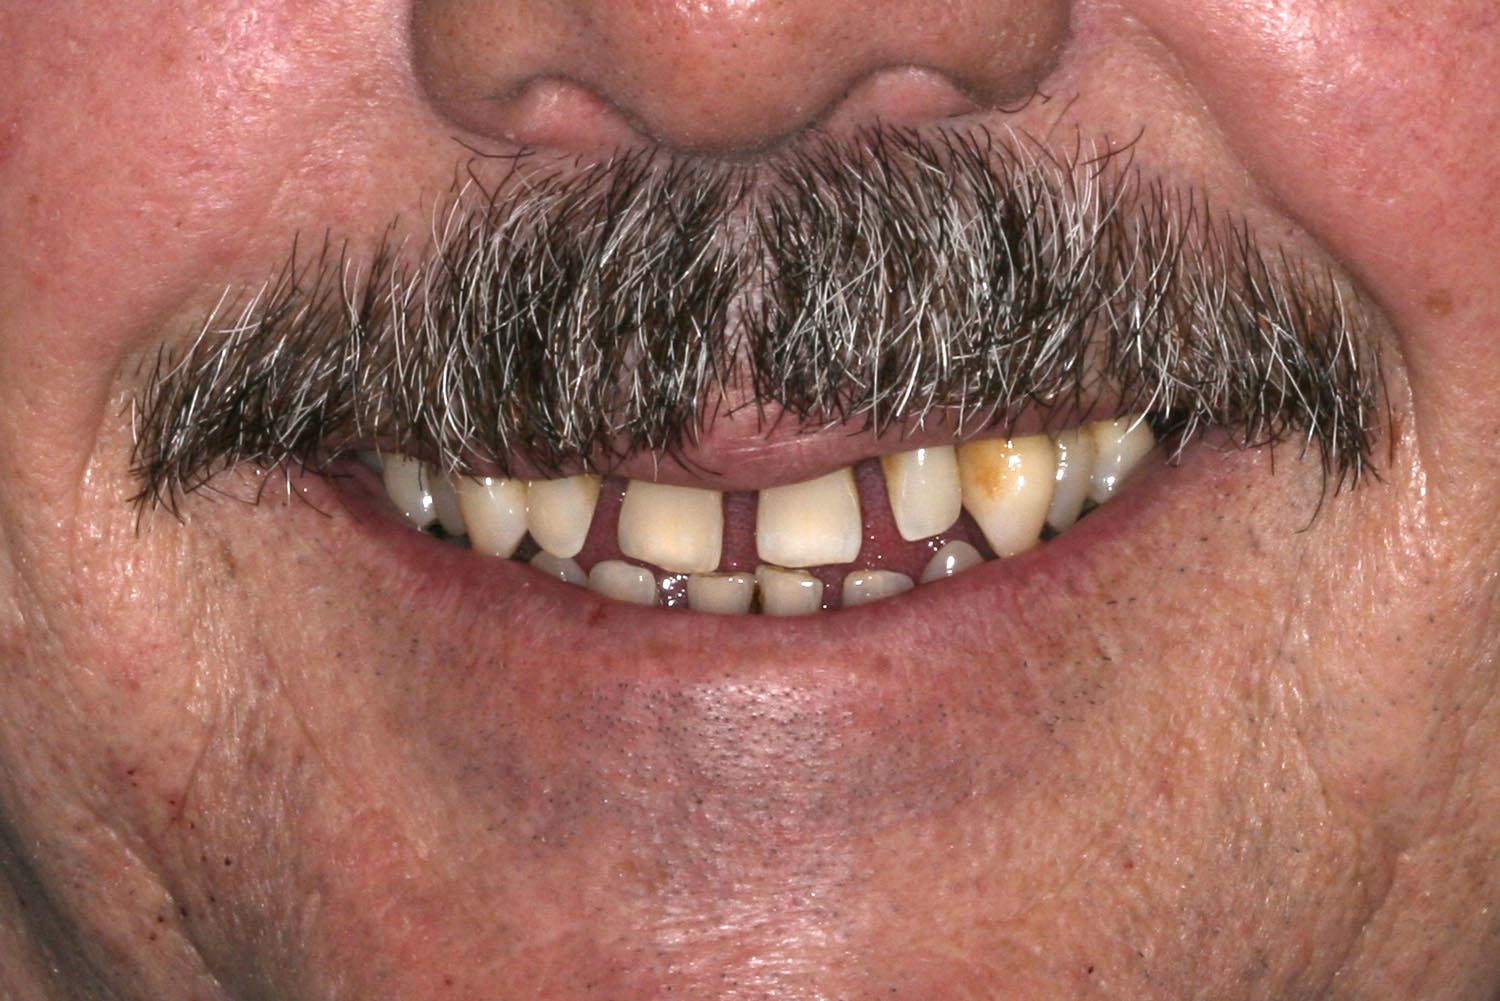 A set of teeth for a mixed full mouth rehabilitation